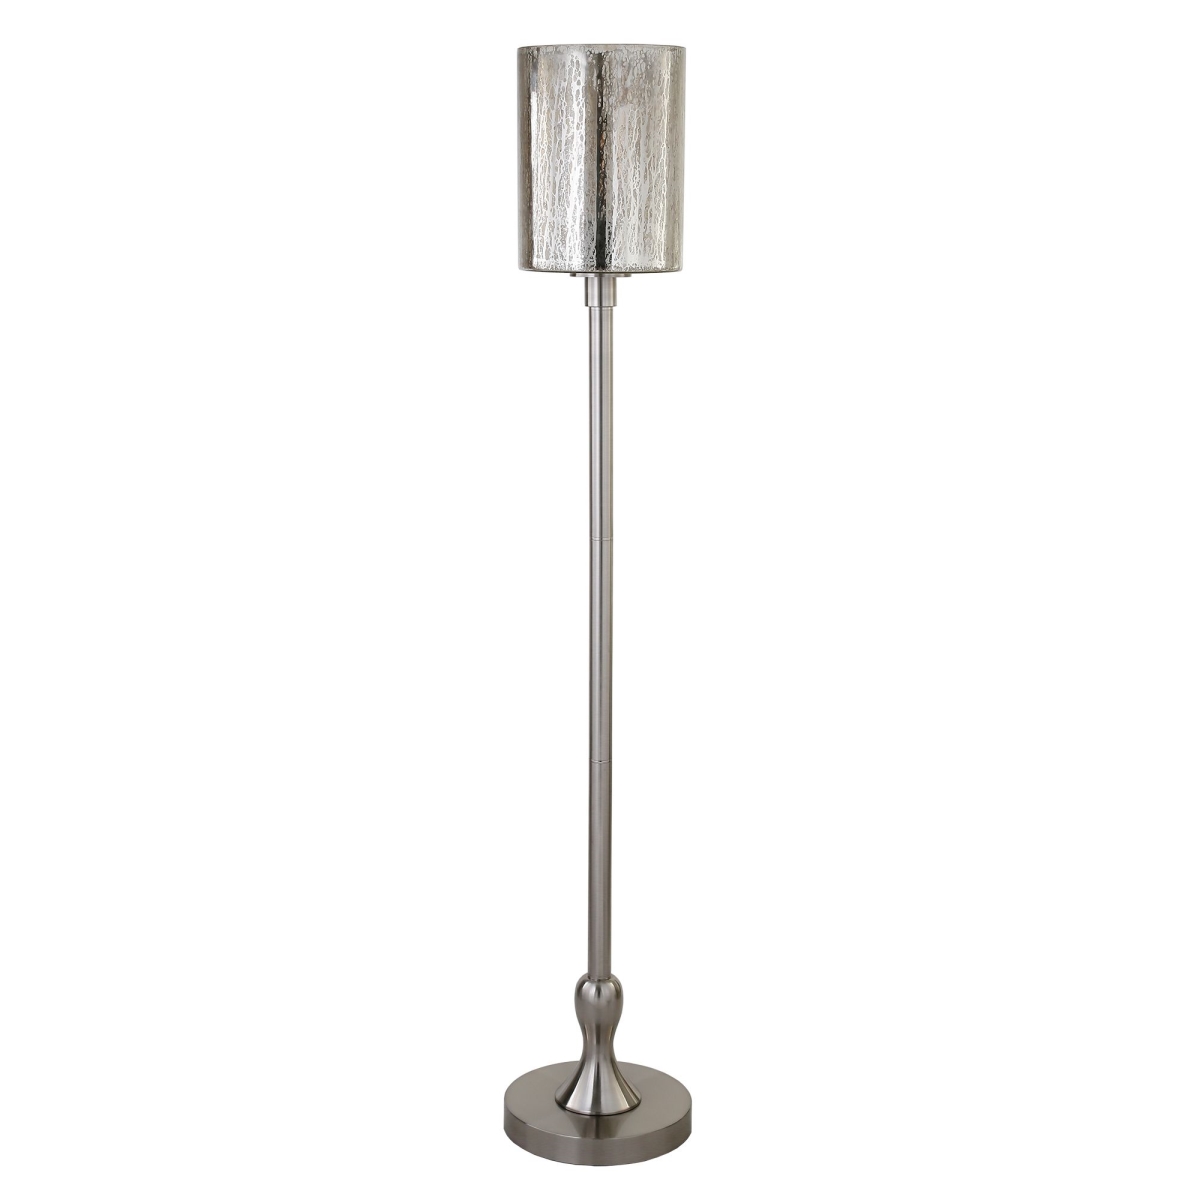 Picture of Henn & Hart FL0916 Numit Brushed Nickel Floor Lamp with Mercury Glass Shade